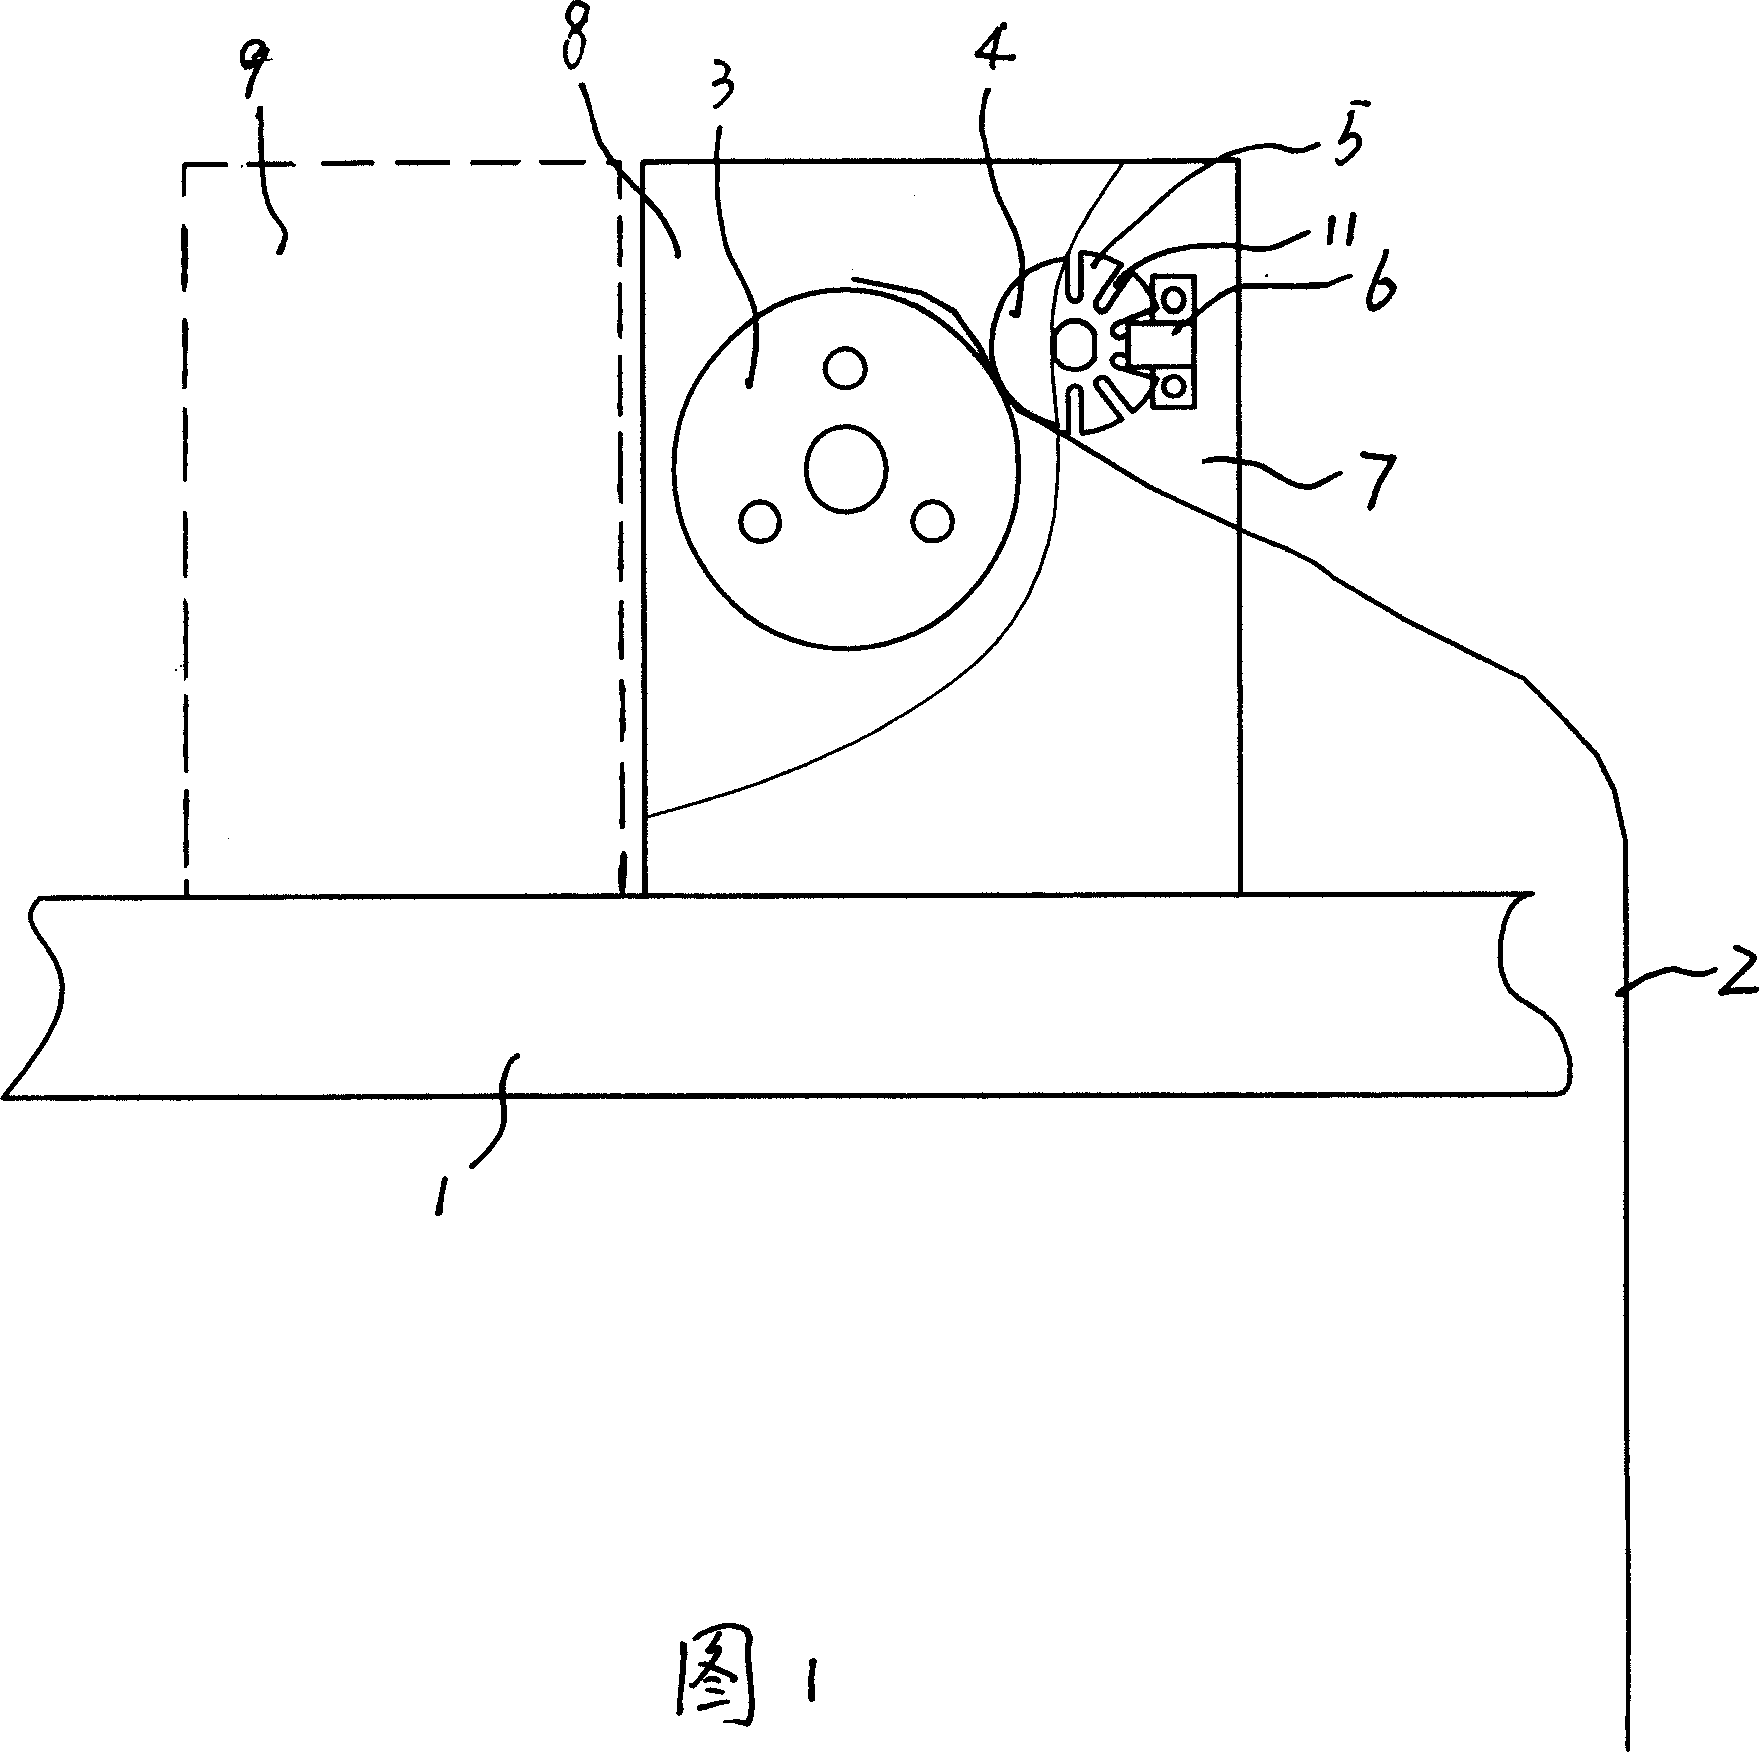 Device for detecting tightening of band of paper money binding machine